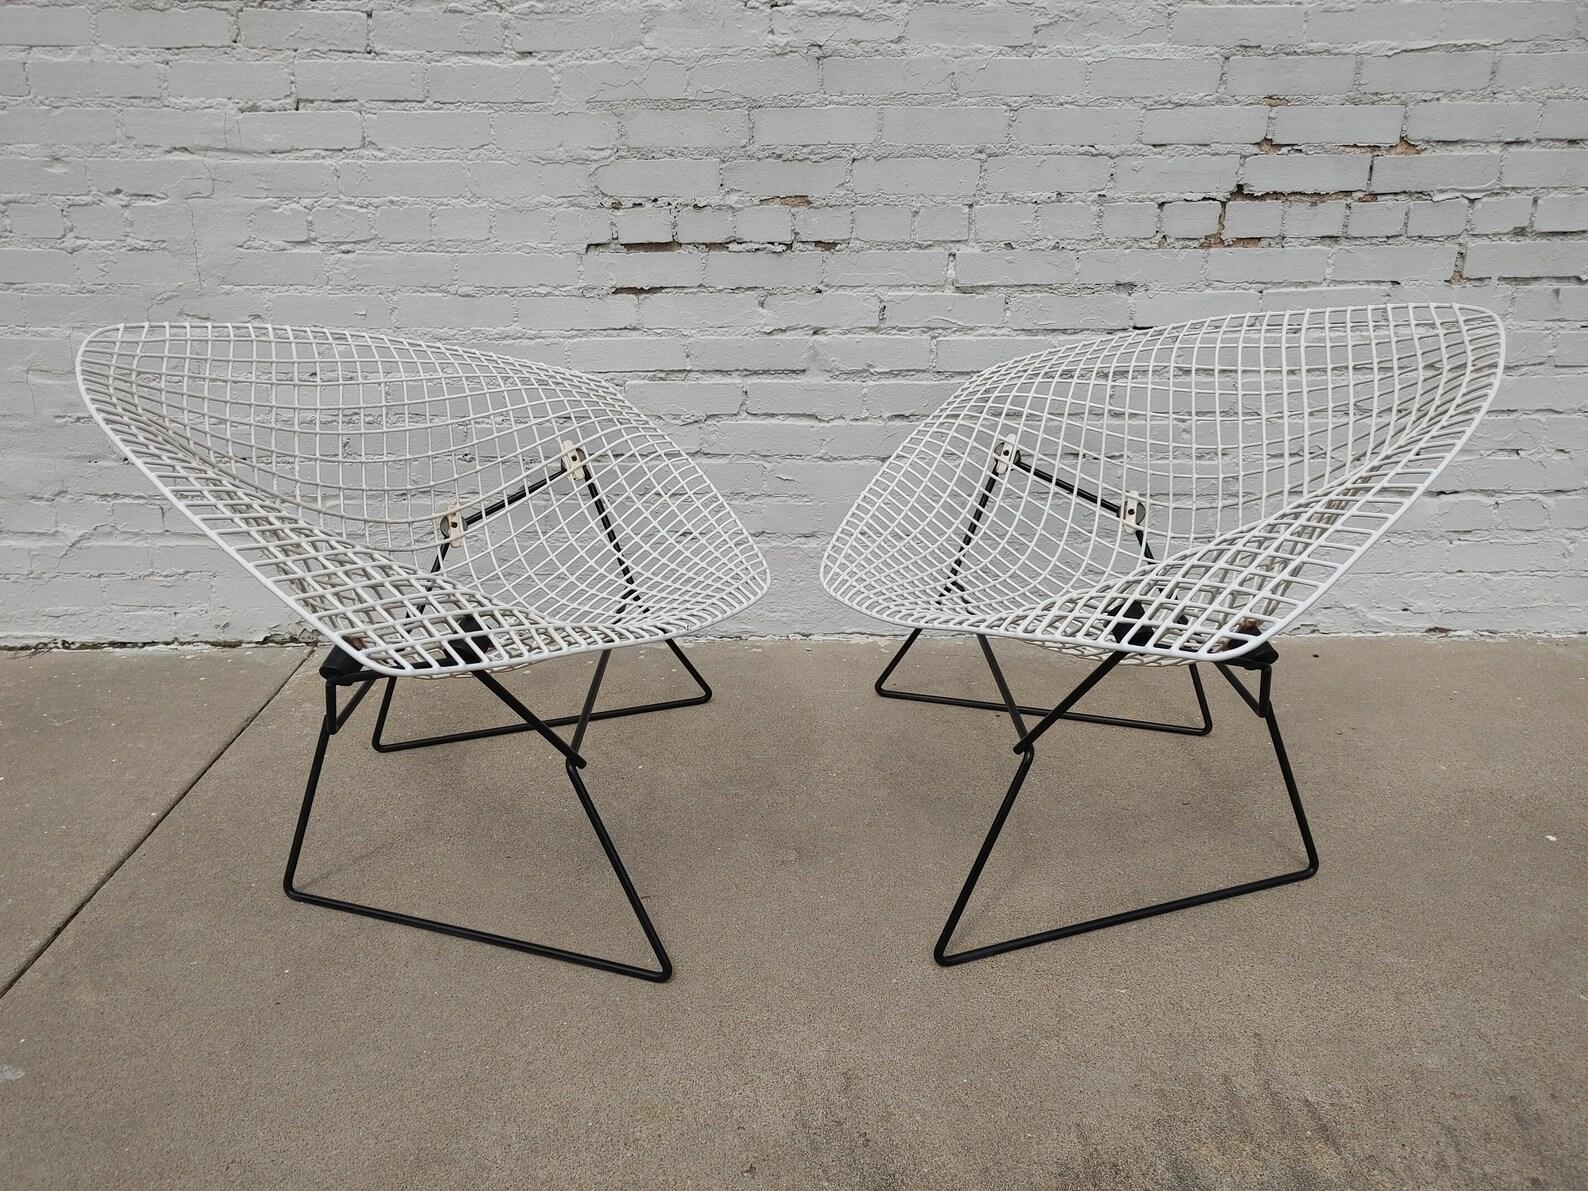 Mid Century Modern Bertoia Large White Wire Diamond Chairs
Good vintage condition and structurally sound. Some discoloration on the white white looks to be bleed through from the underneath wire.
Additional information:
Materials: wire,metal
Vintage